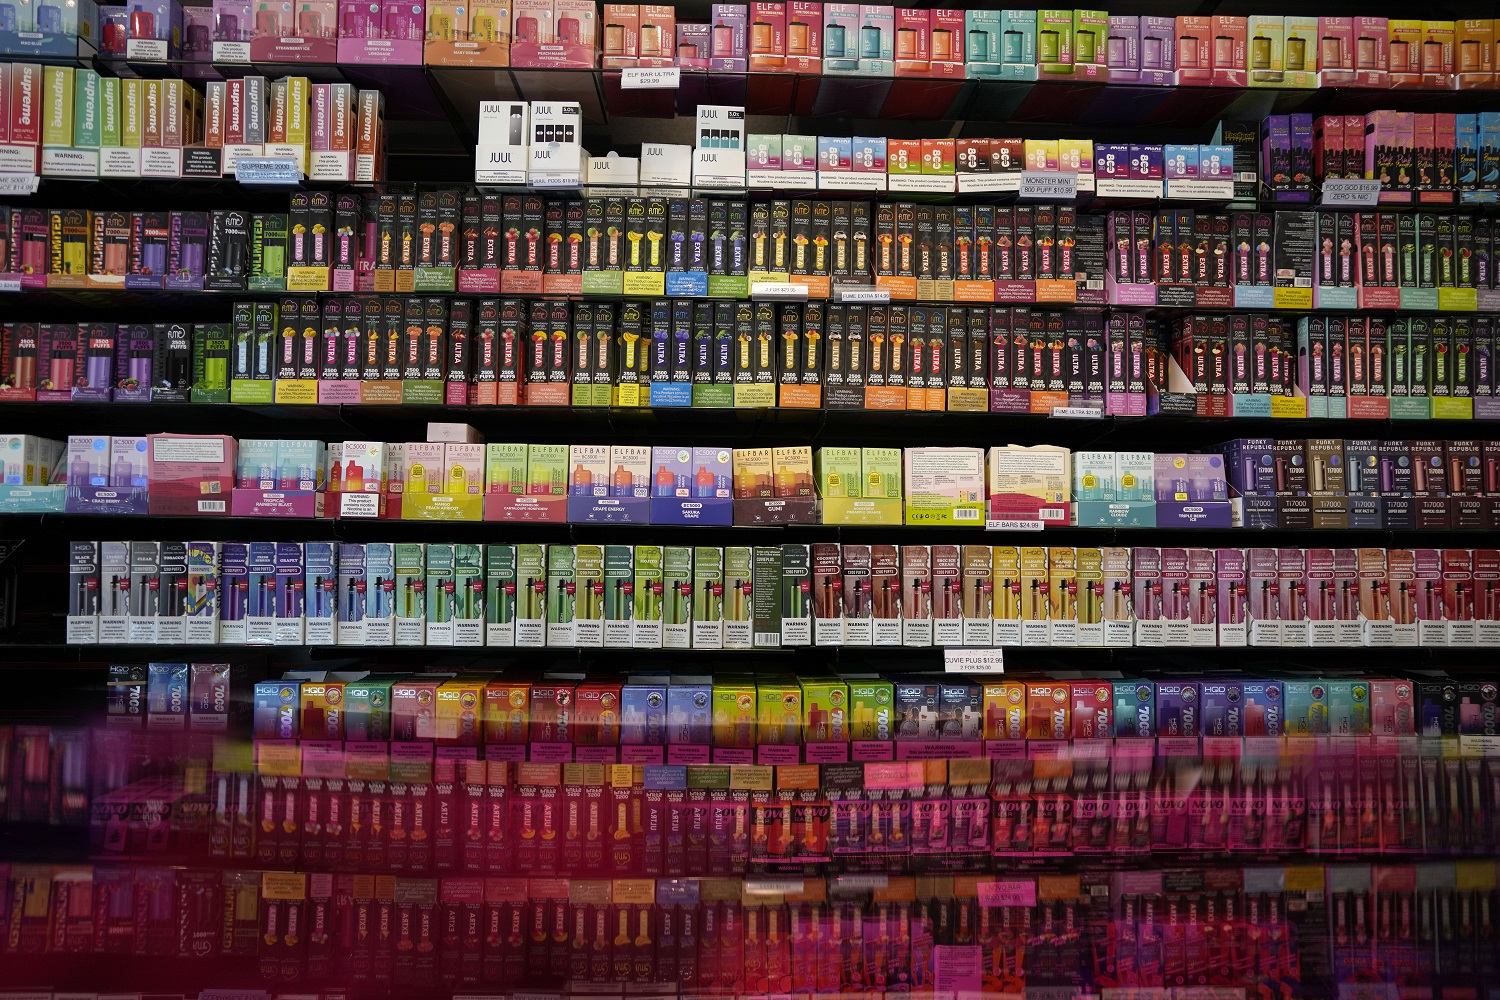 Unauthorized vapes pouring into the US: colorful wall full of vaping products